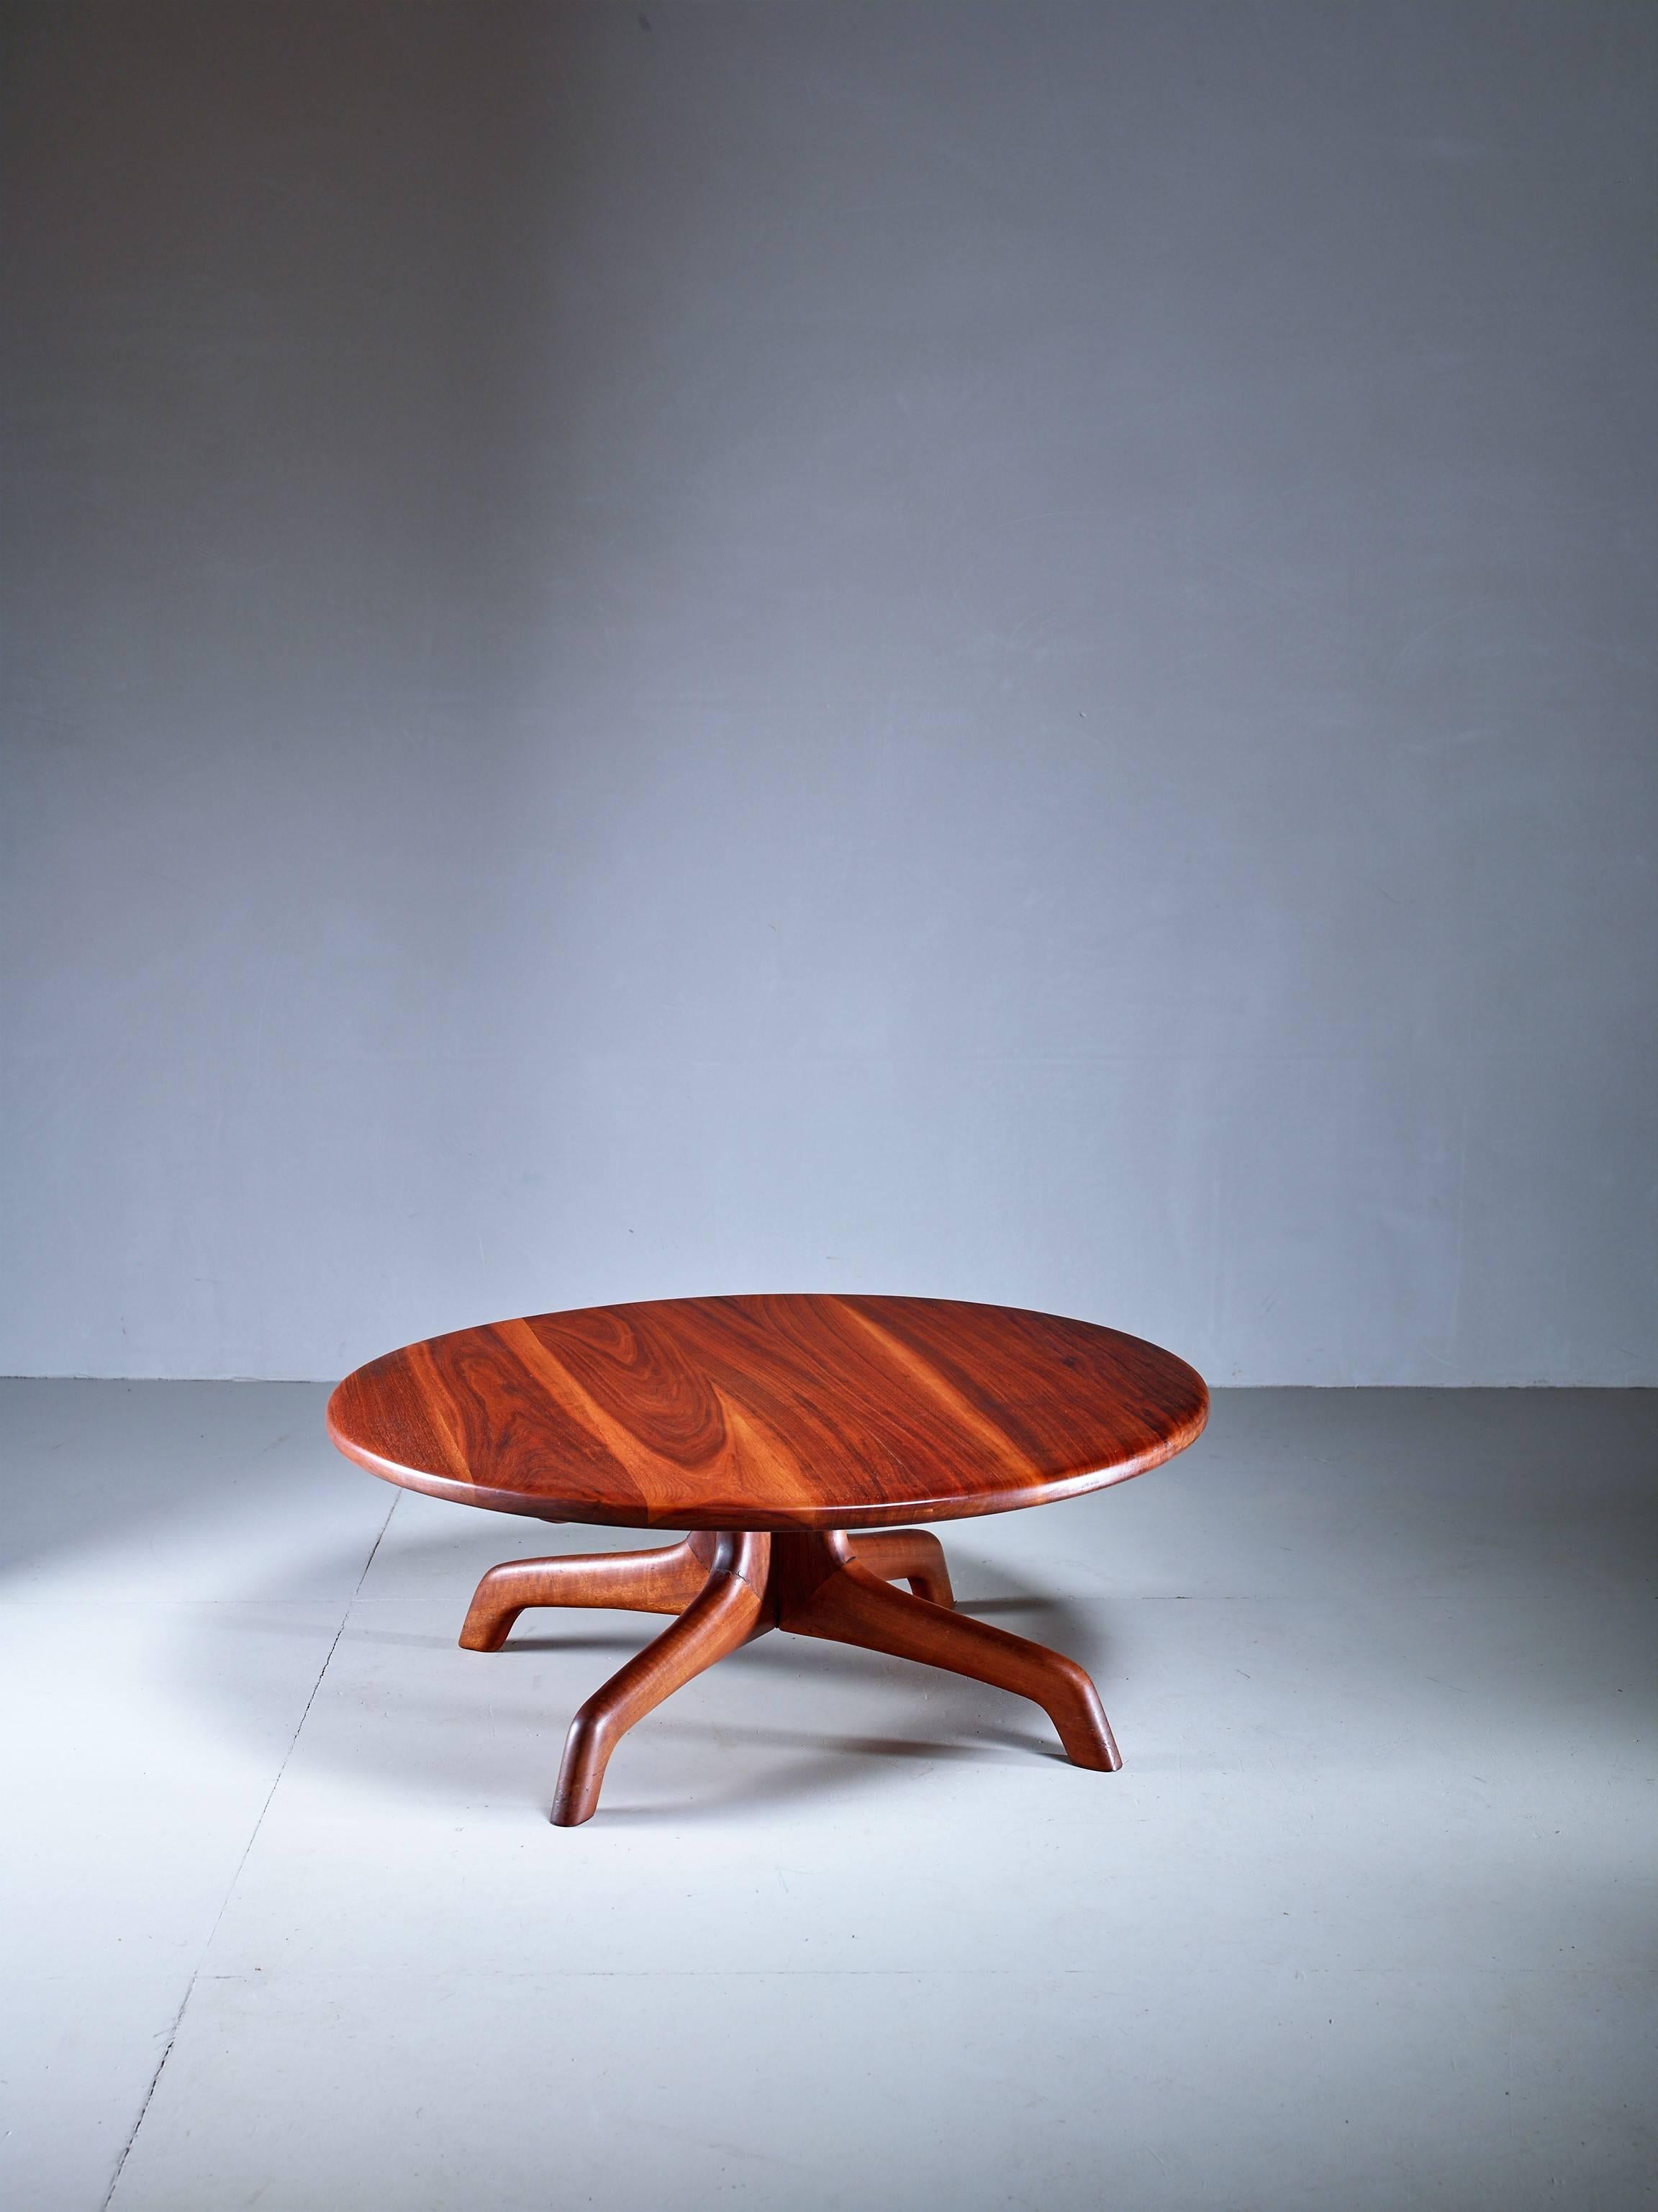 A round walnut coffee table with four wide feet attributed to American craftsman Arthur Espenet.

Born in New York City in 1920, Arthur Espenet Carpenter earned a degree in economics from Dartmouth College, then served four years in the Navy during